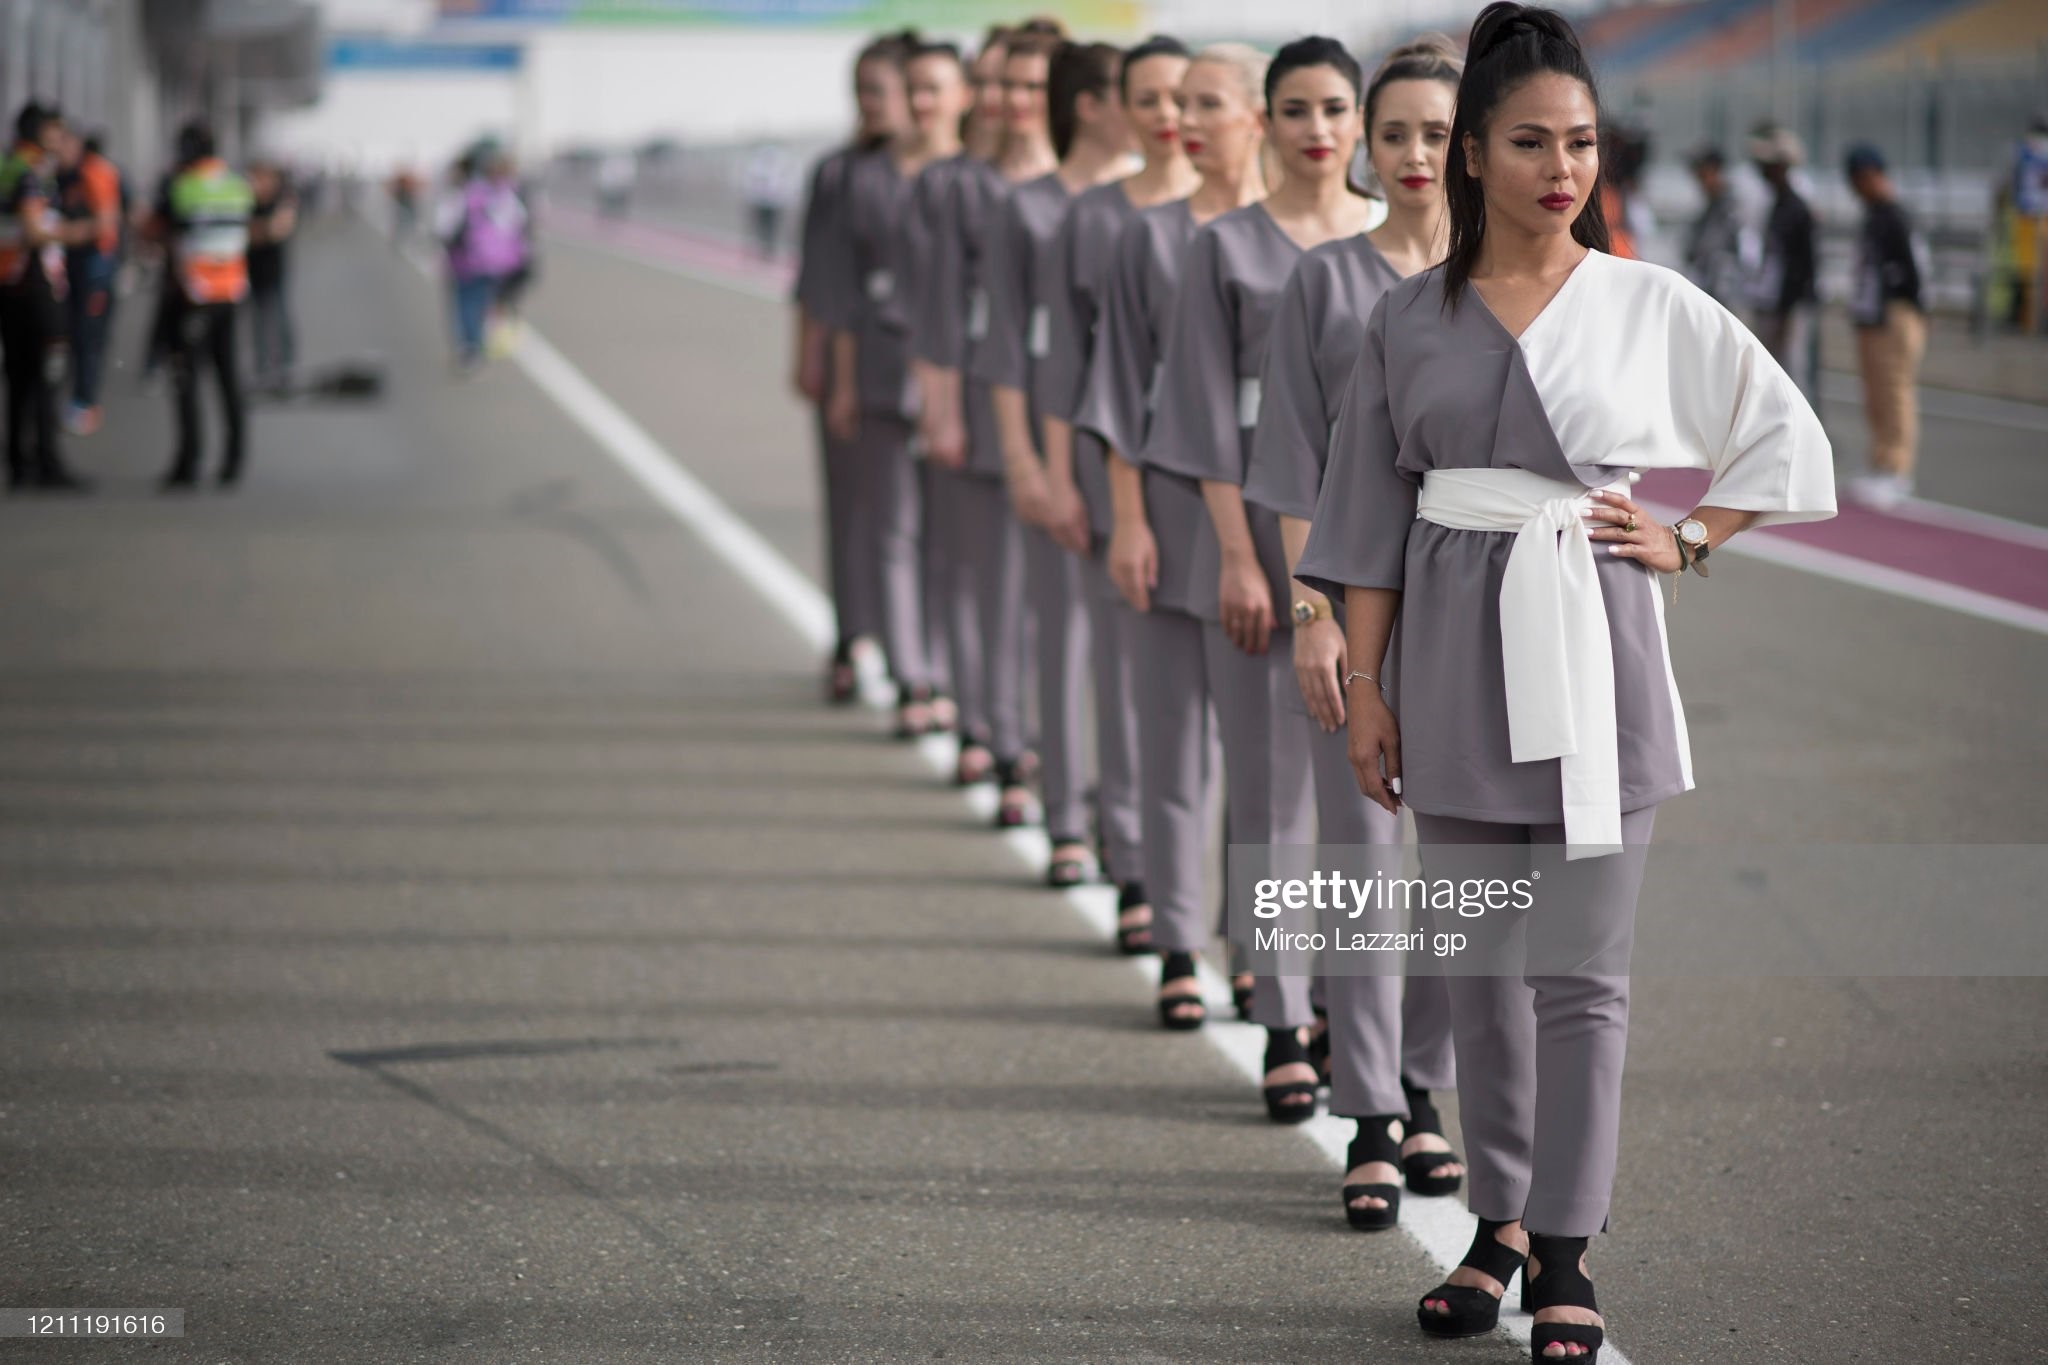 The grid girls pose in the pits before the grid during the Moto4 race during the Moto2 and Moto3 GP of Qatar races at Losail Circuit on March 08, 2020 in Doha, Qatar. 